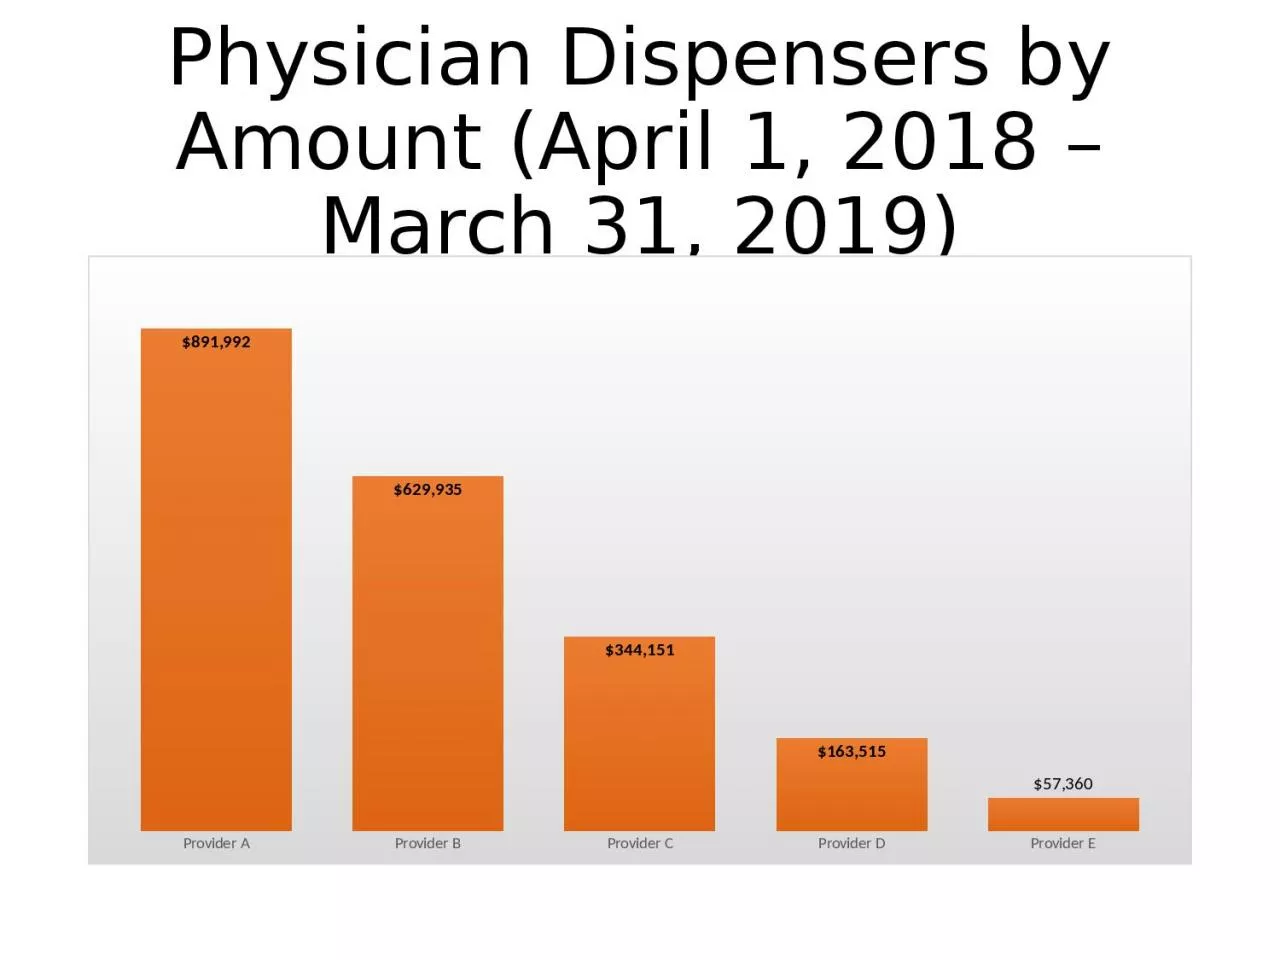 Physician Dispensers by Amount (April 1, 2018 – March 31, 2019)